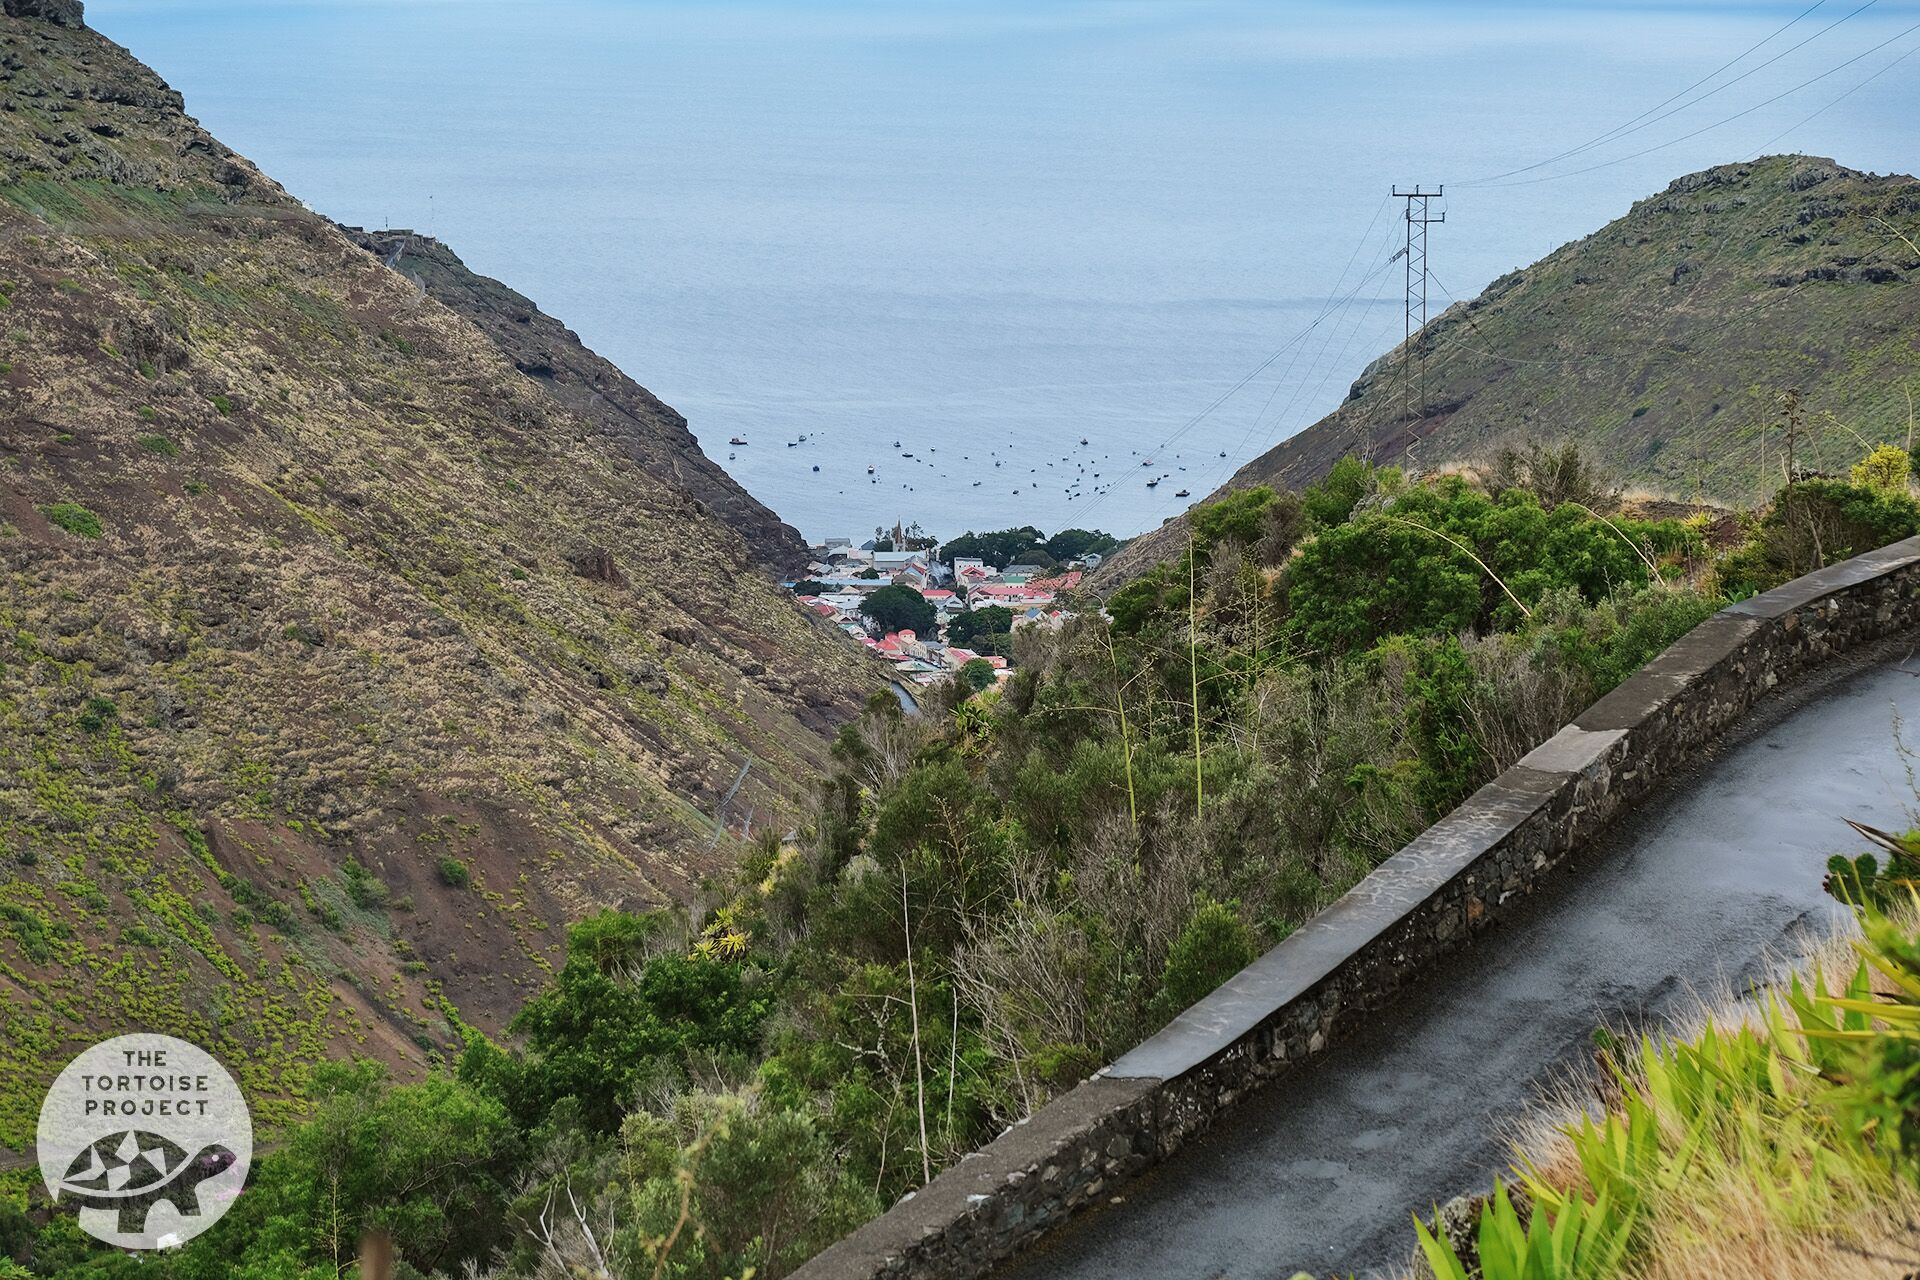 Saint Helena. A look into Jamestown from the switchback road above.